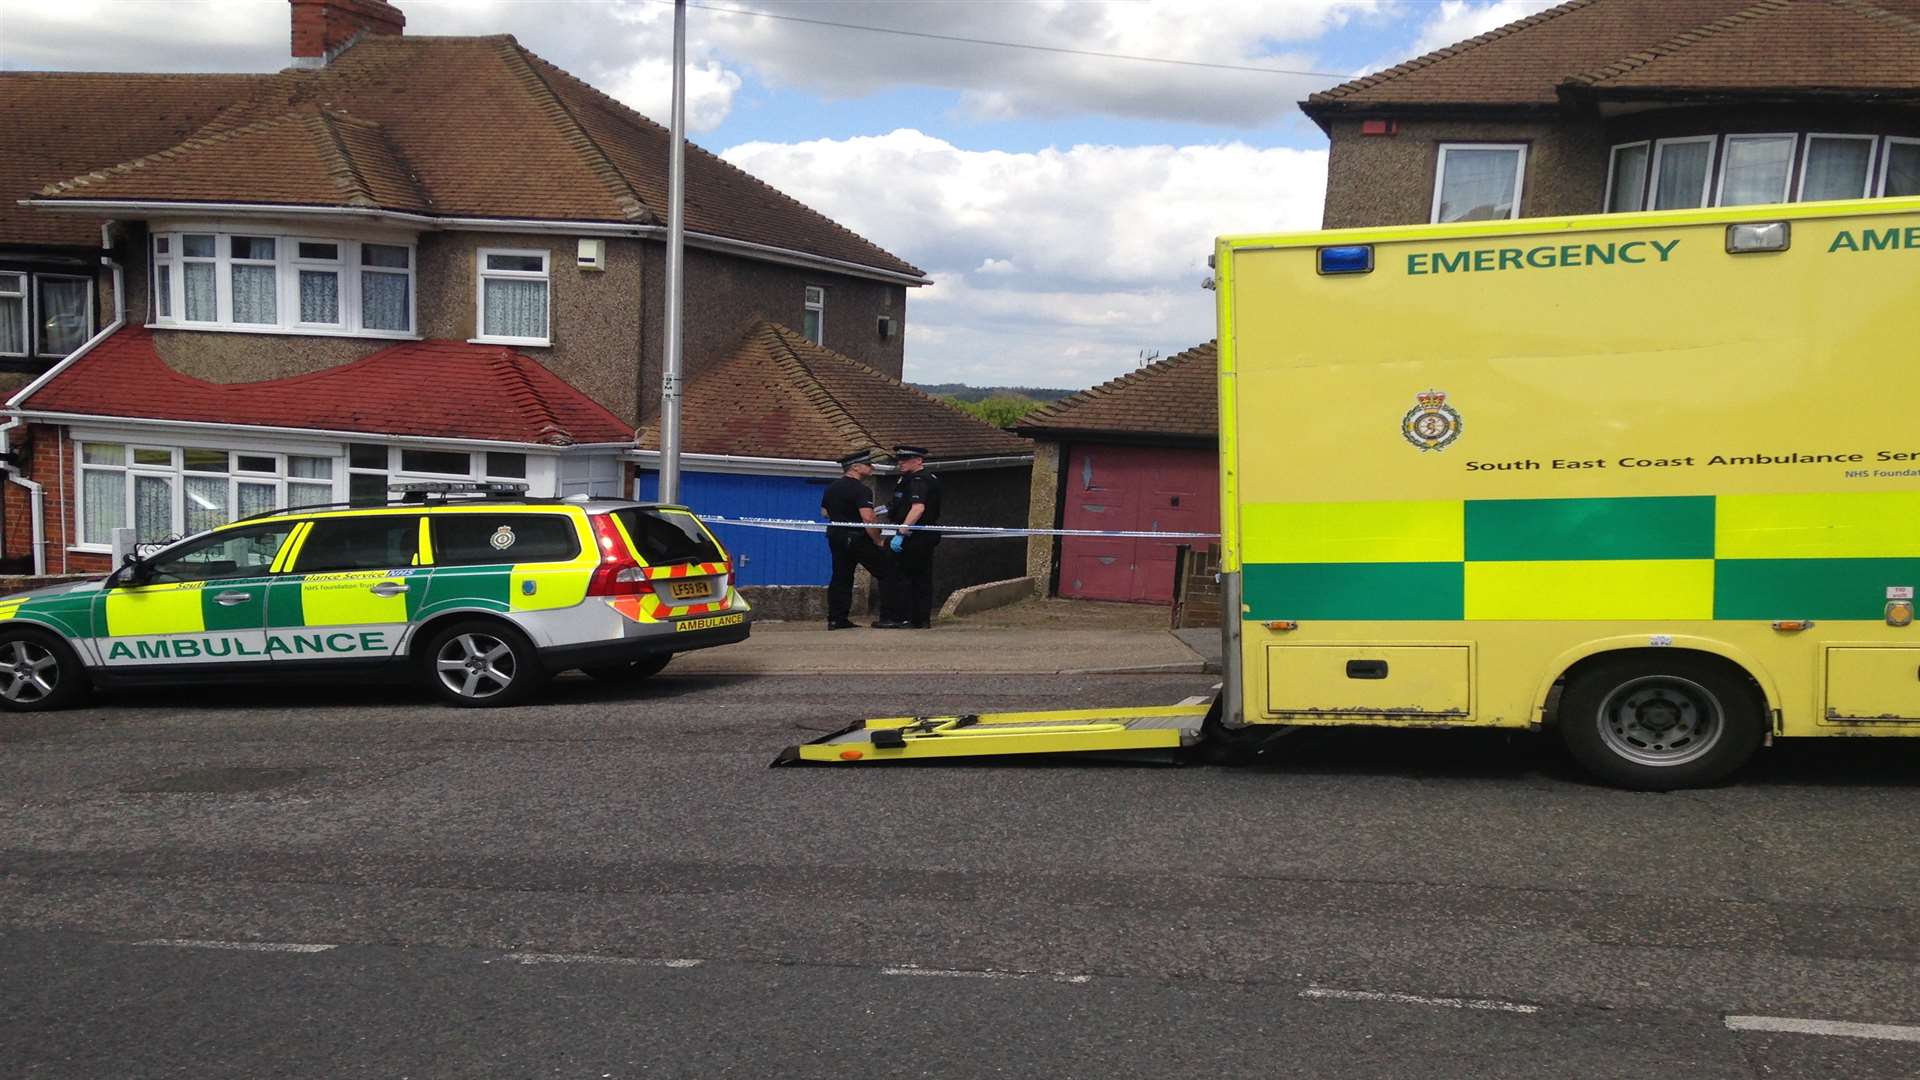 Police and paramedics were called to Grosvenor Avenue, Chatham